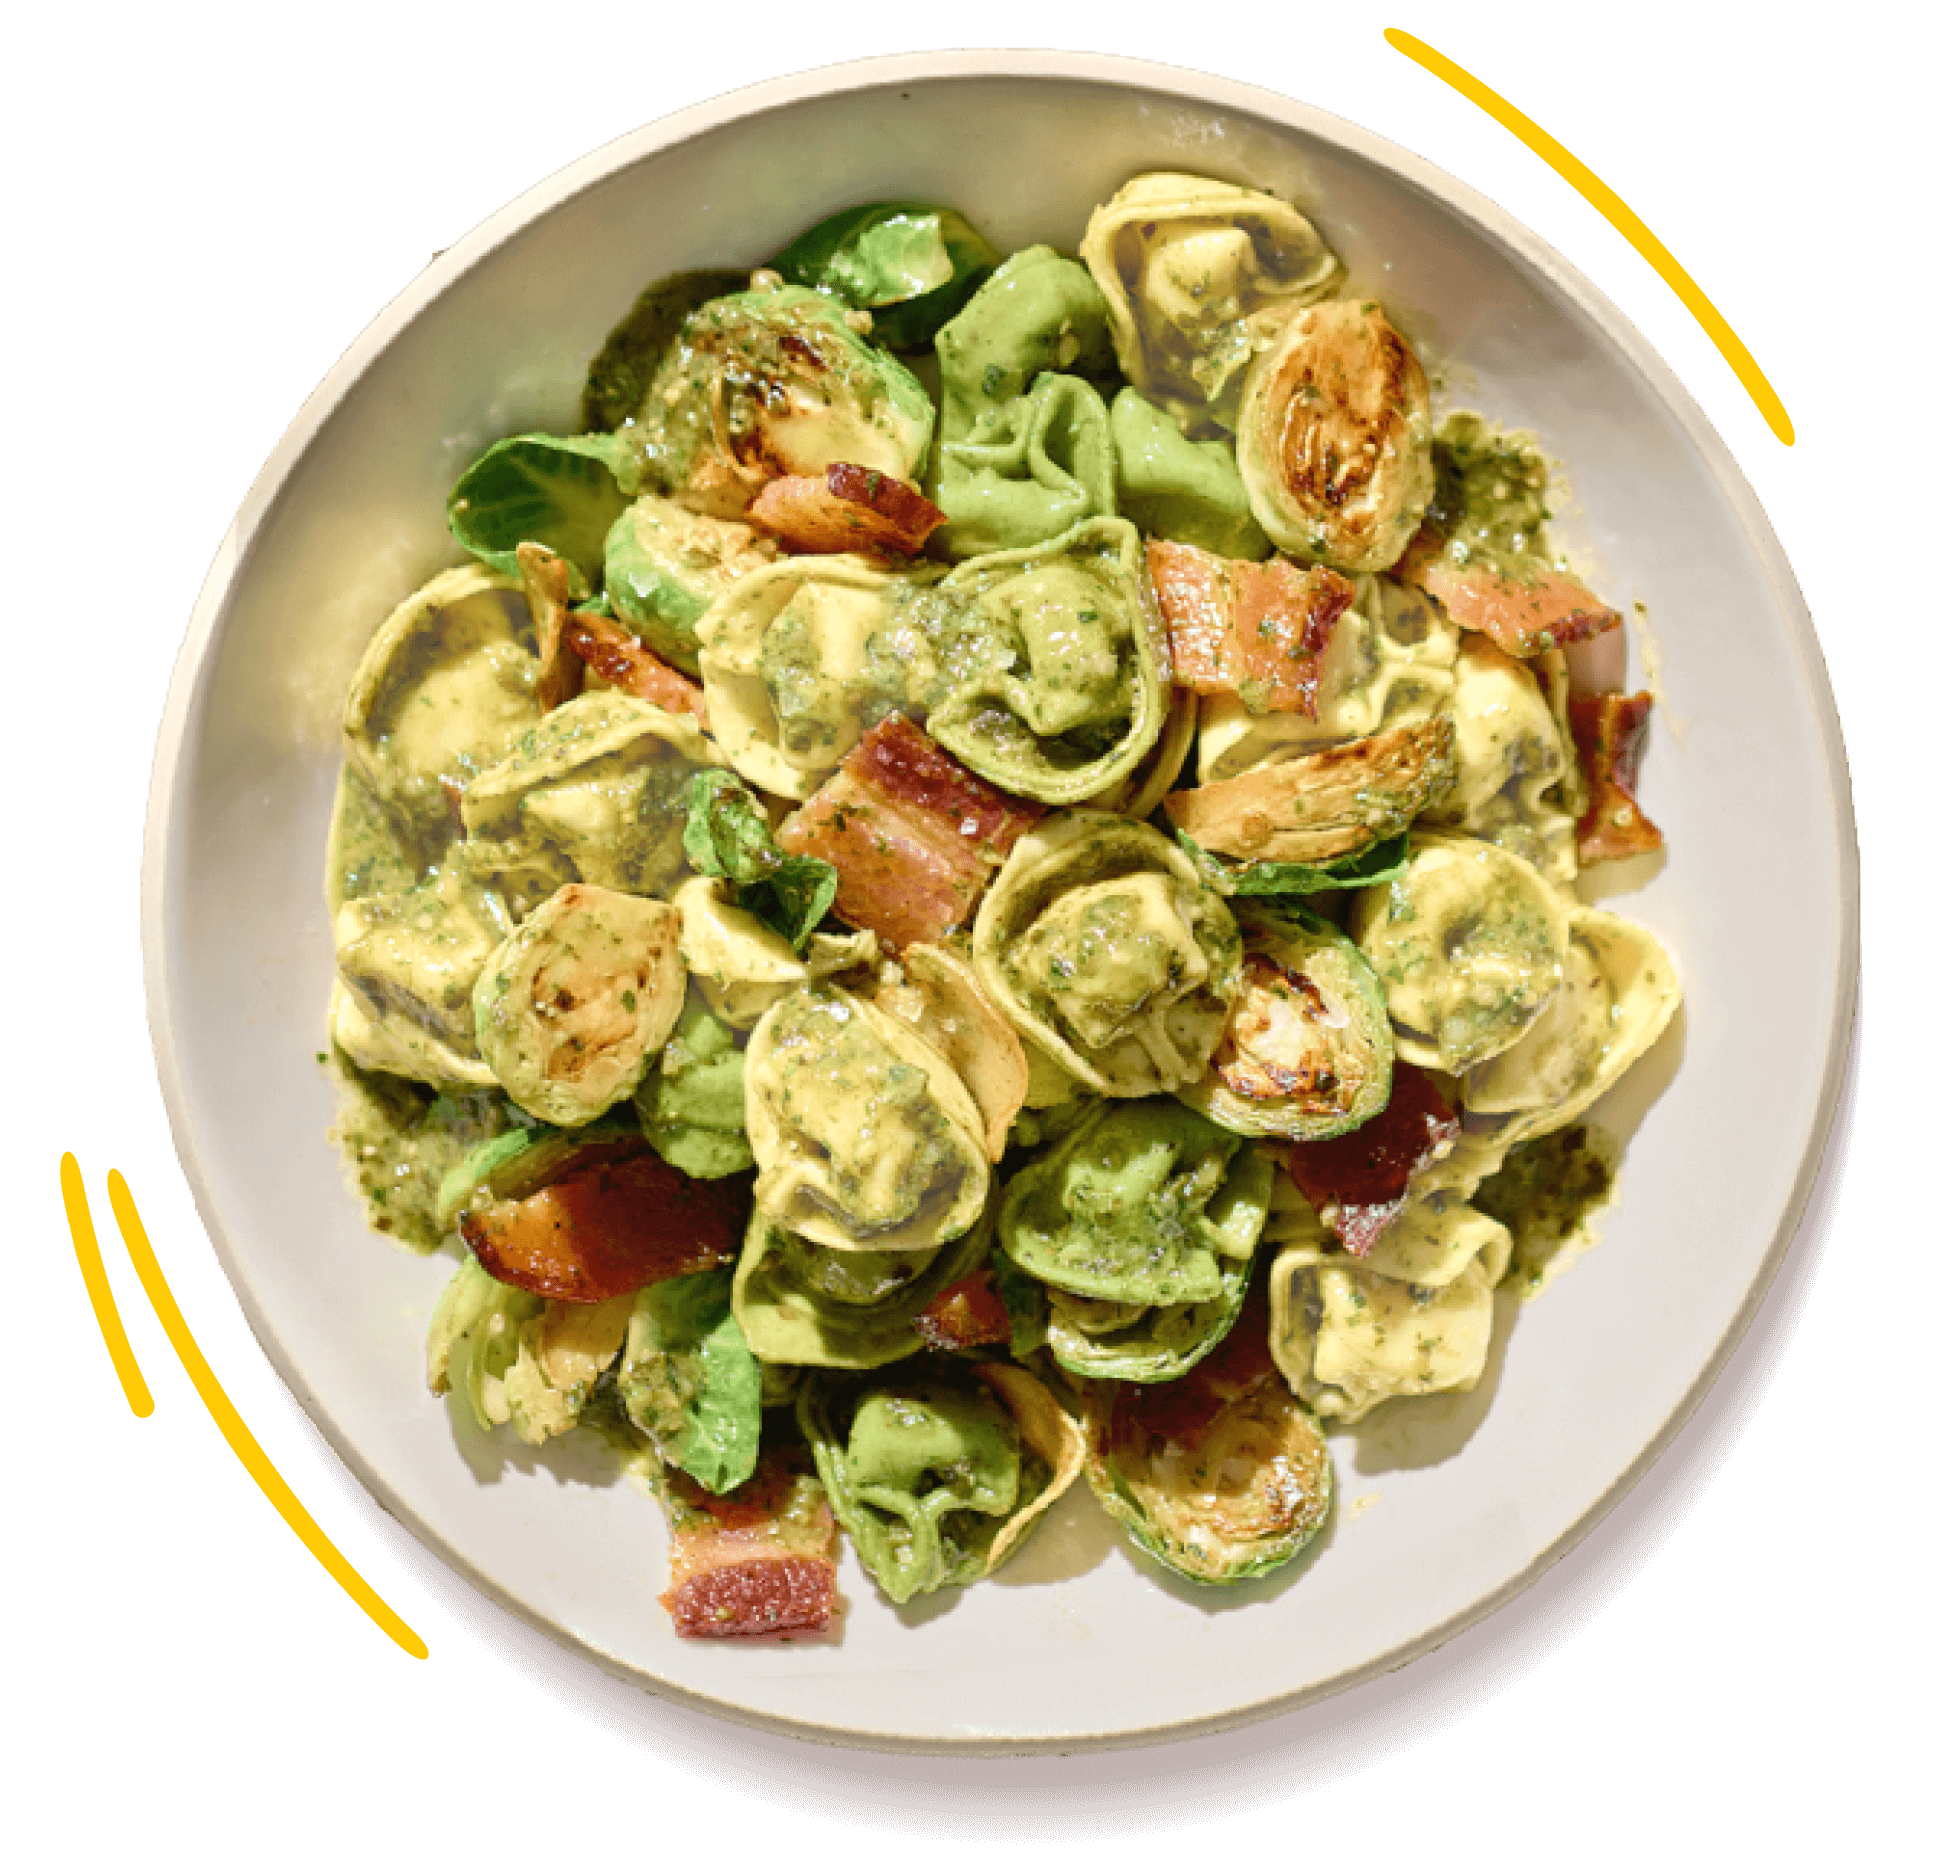 Tortellini with Roasted Brussels Sprouts, Bacon and Pesto